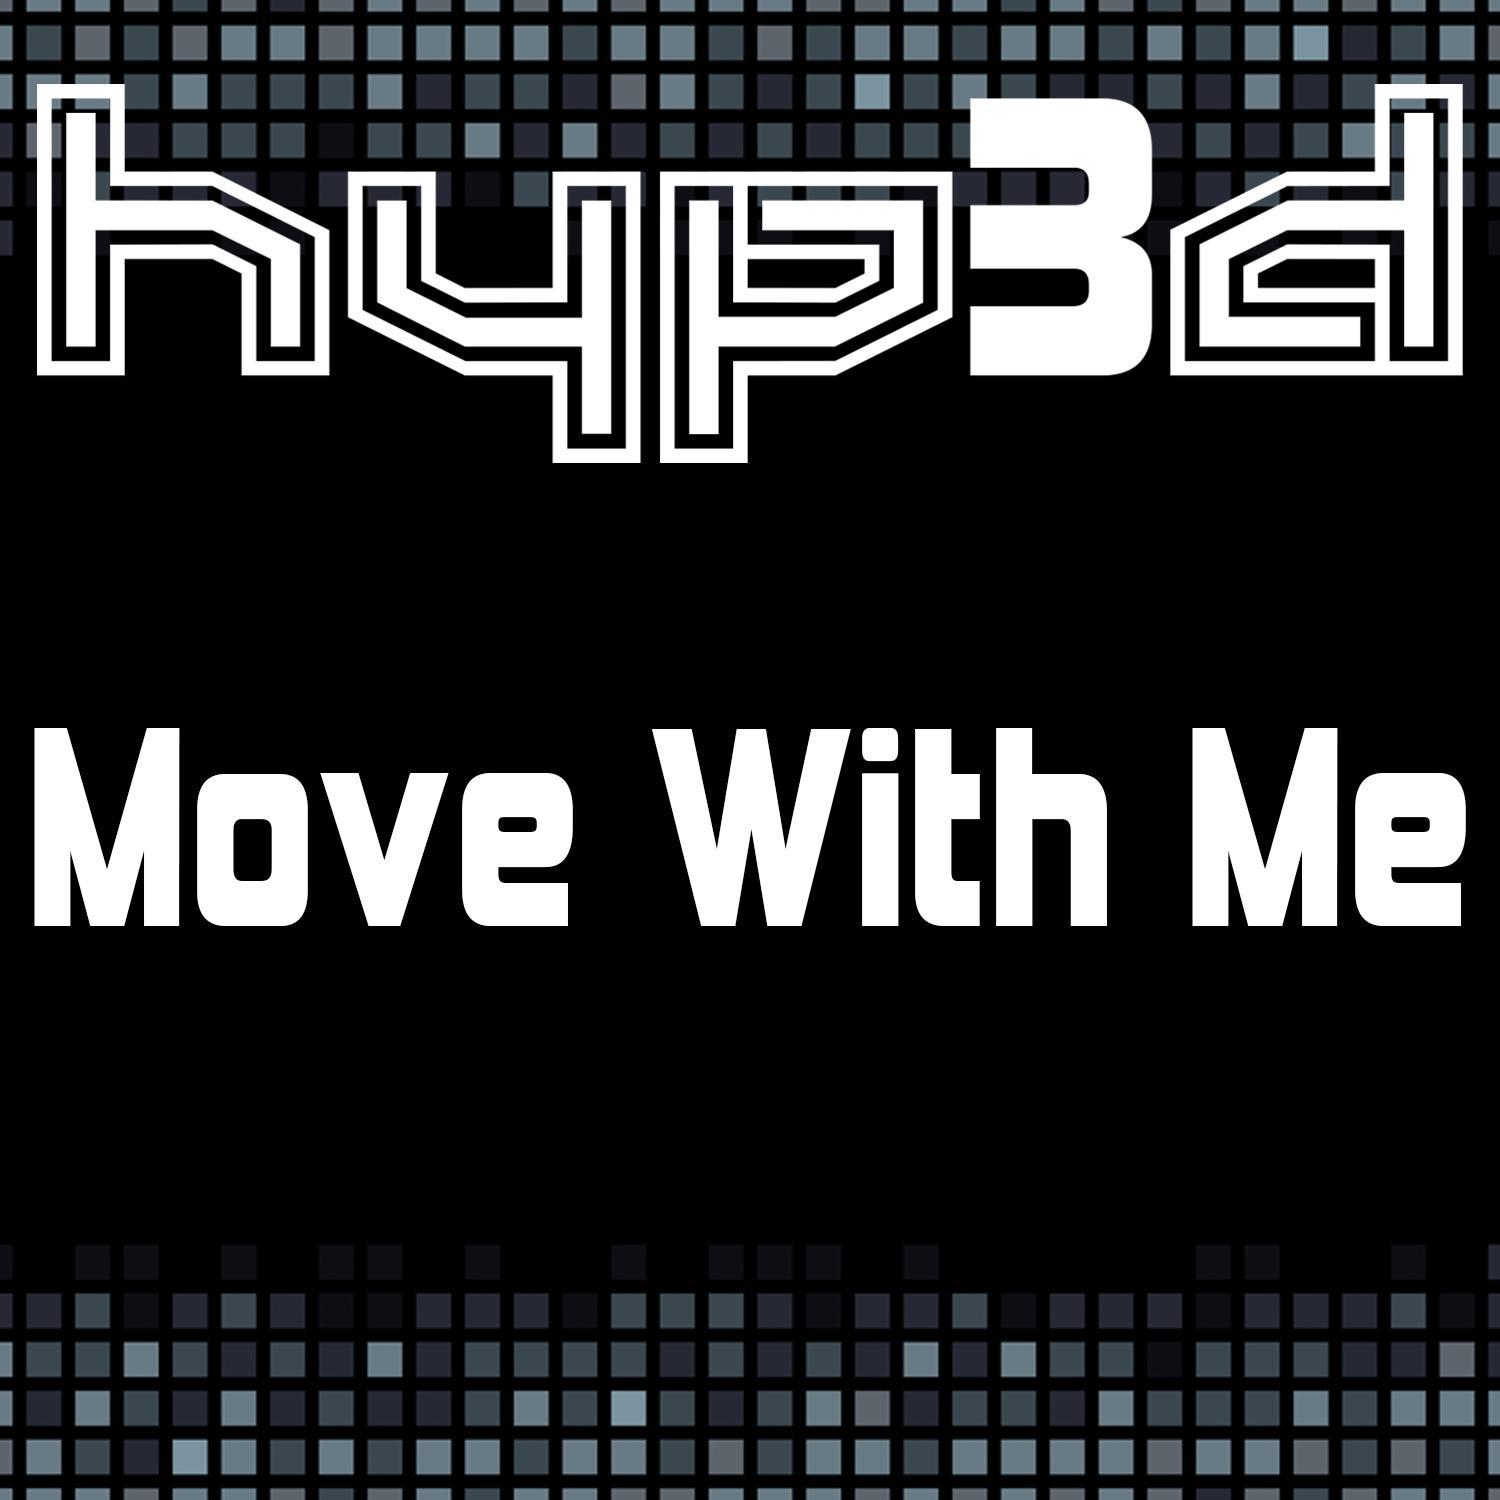 Hyp3d - Move with Me